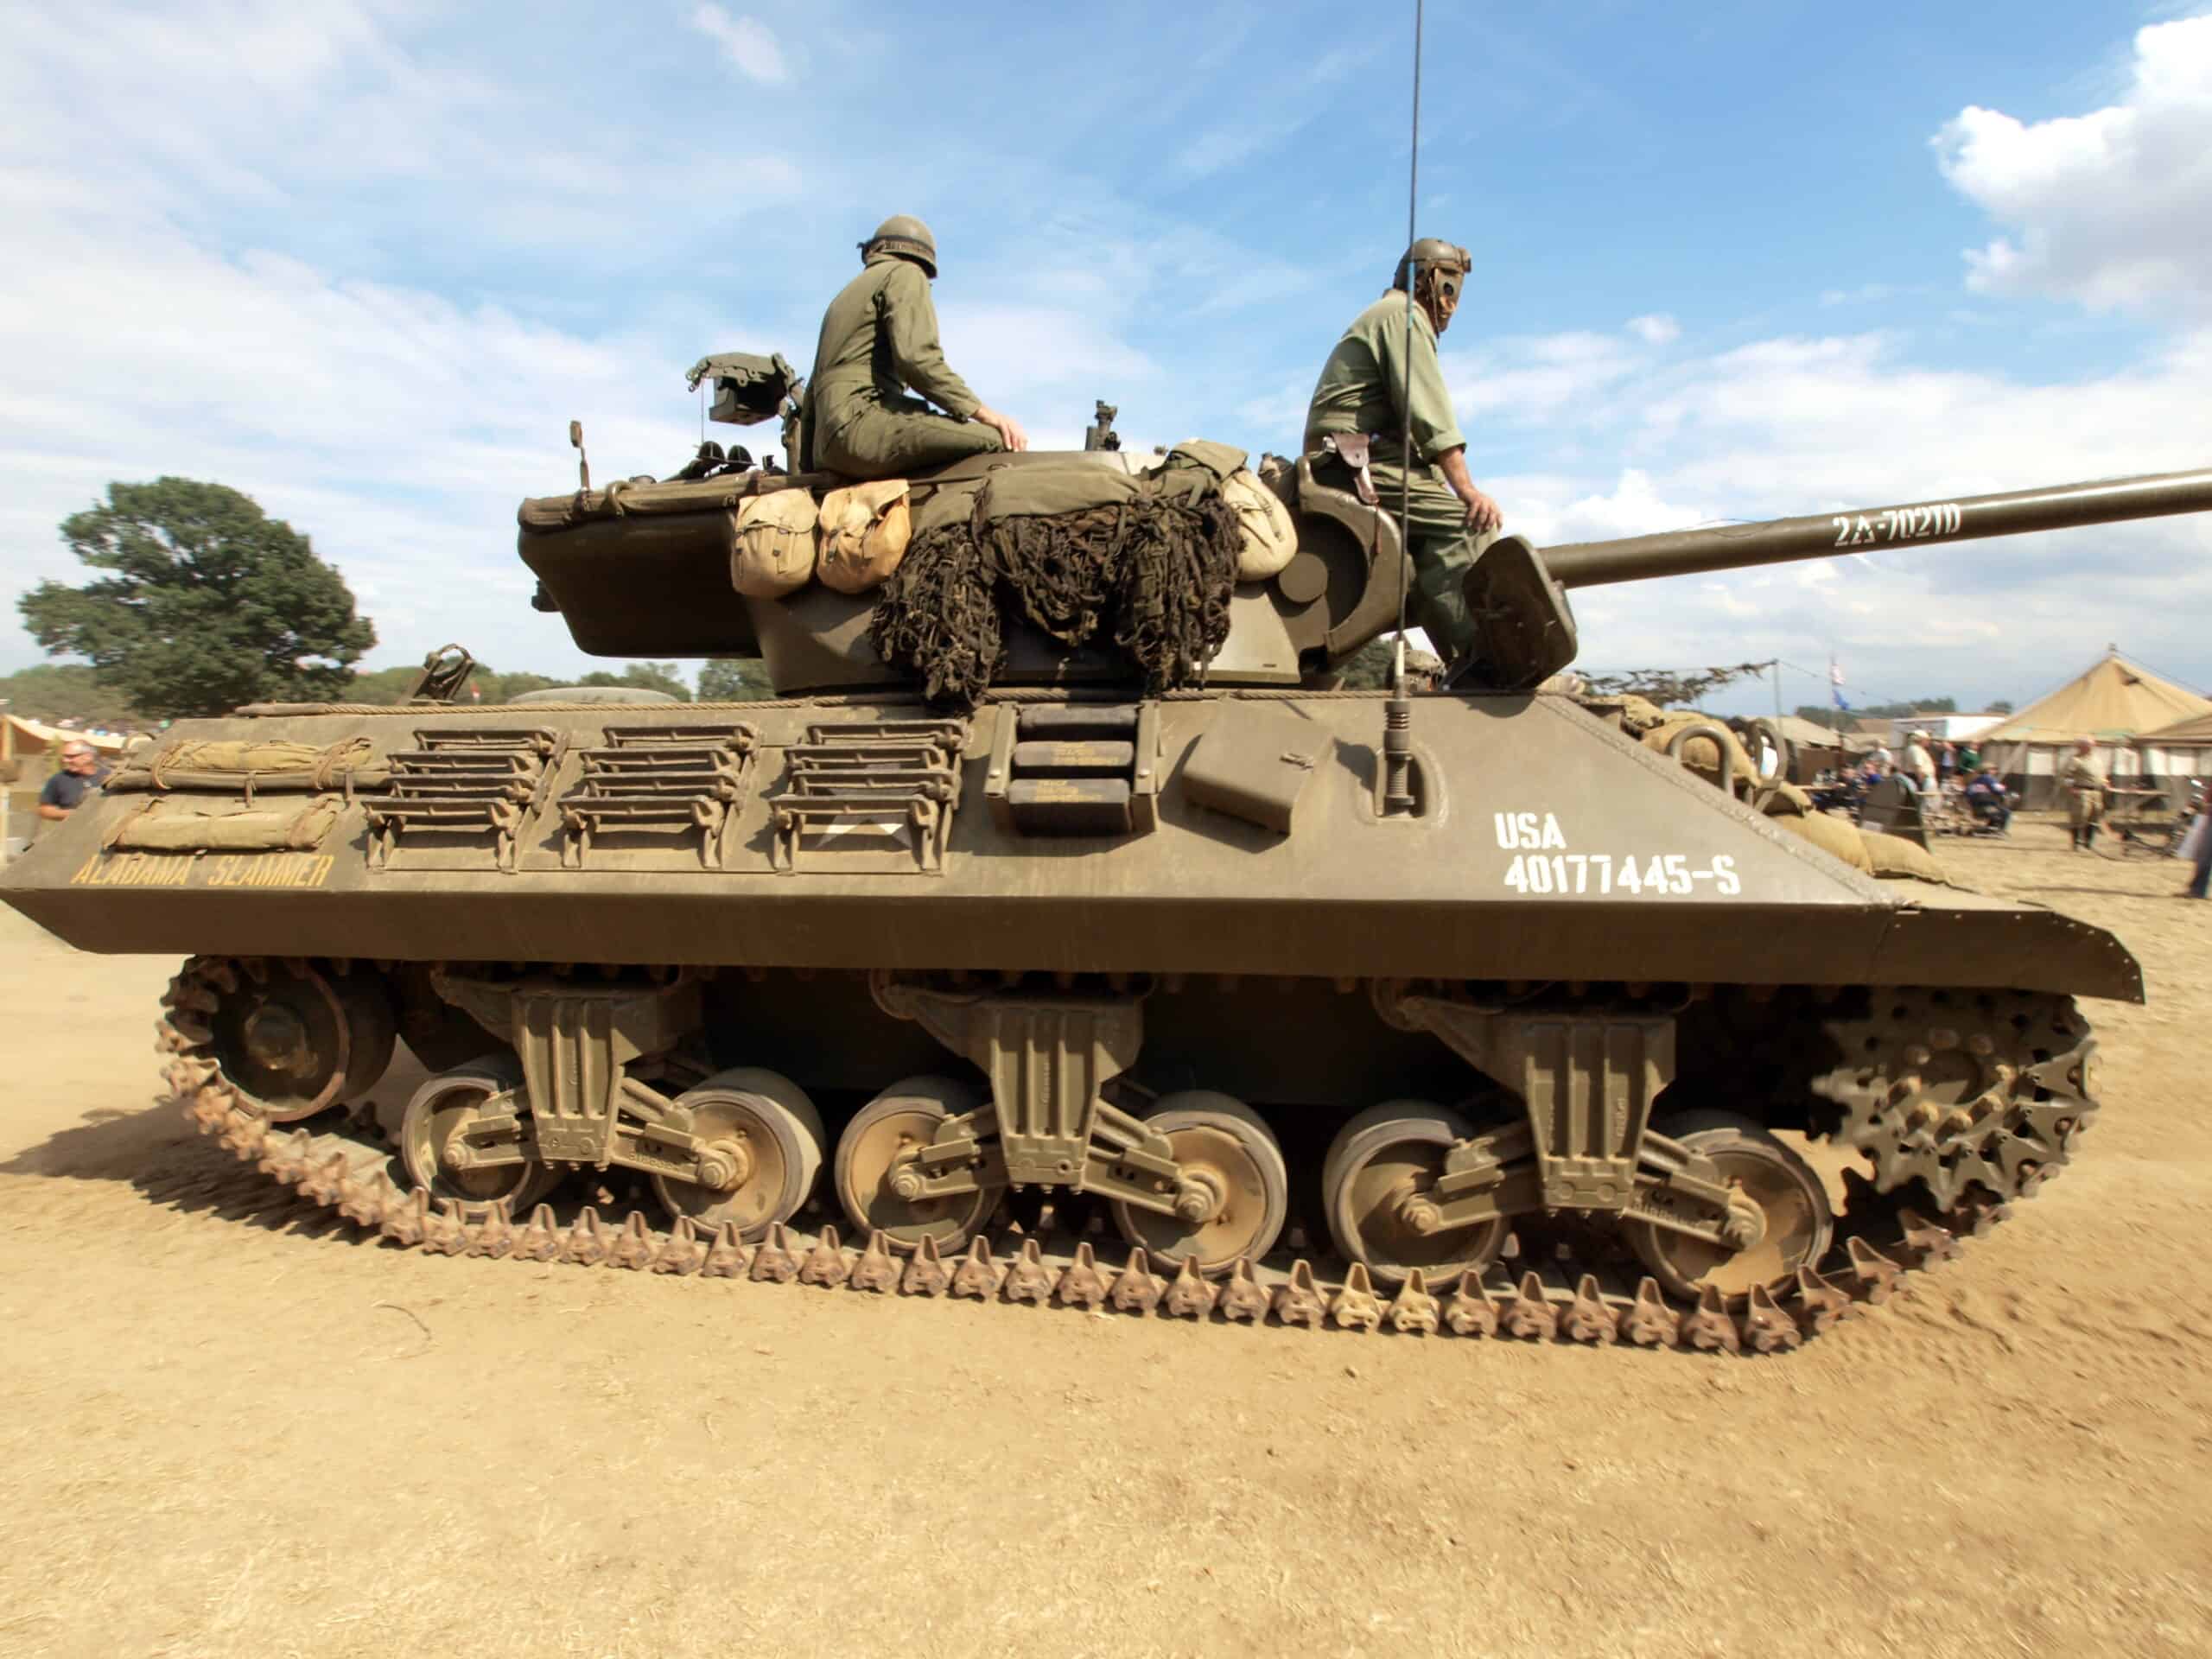 The Tanks of WWII, Ranked from Slowest to Fastest - 24/7 Wall St.